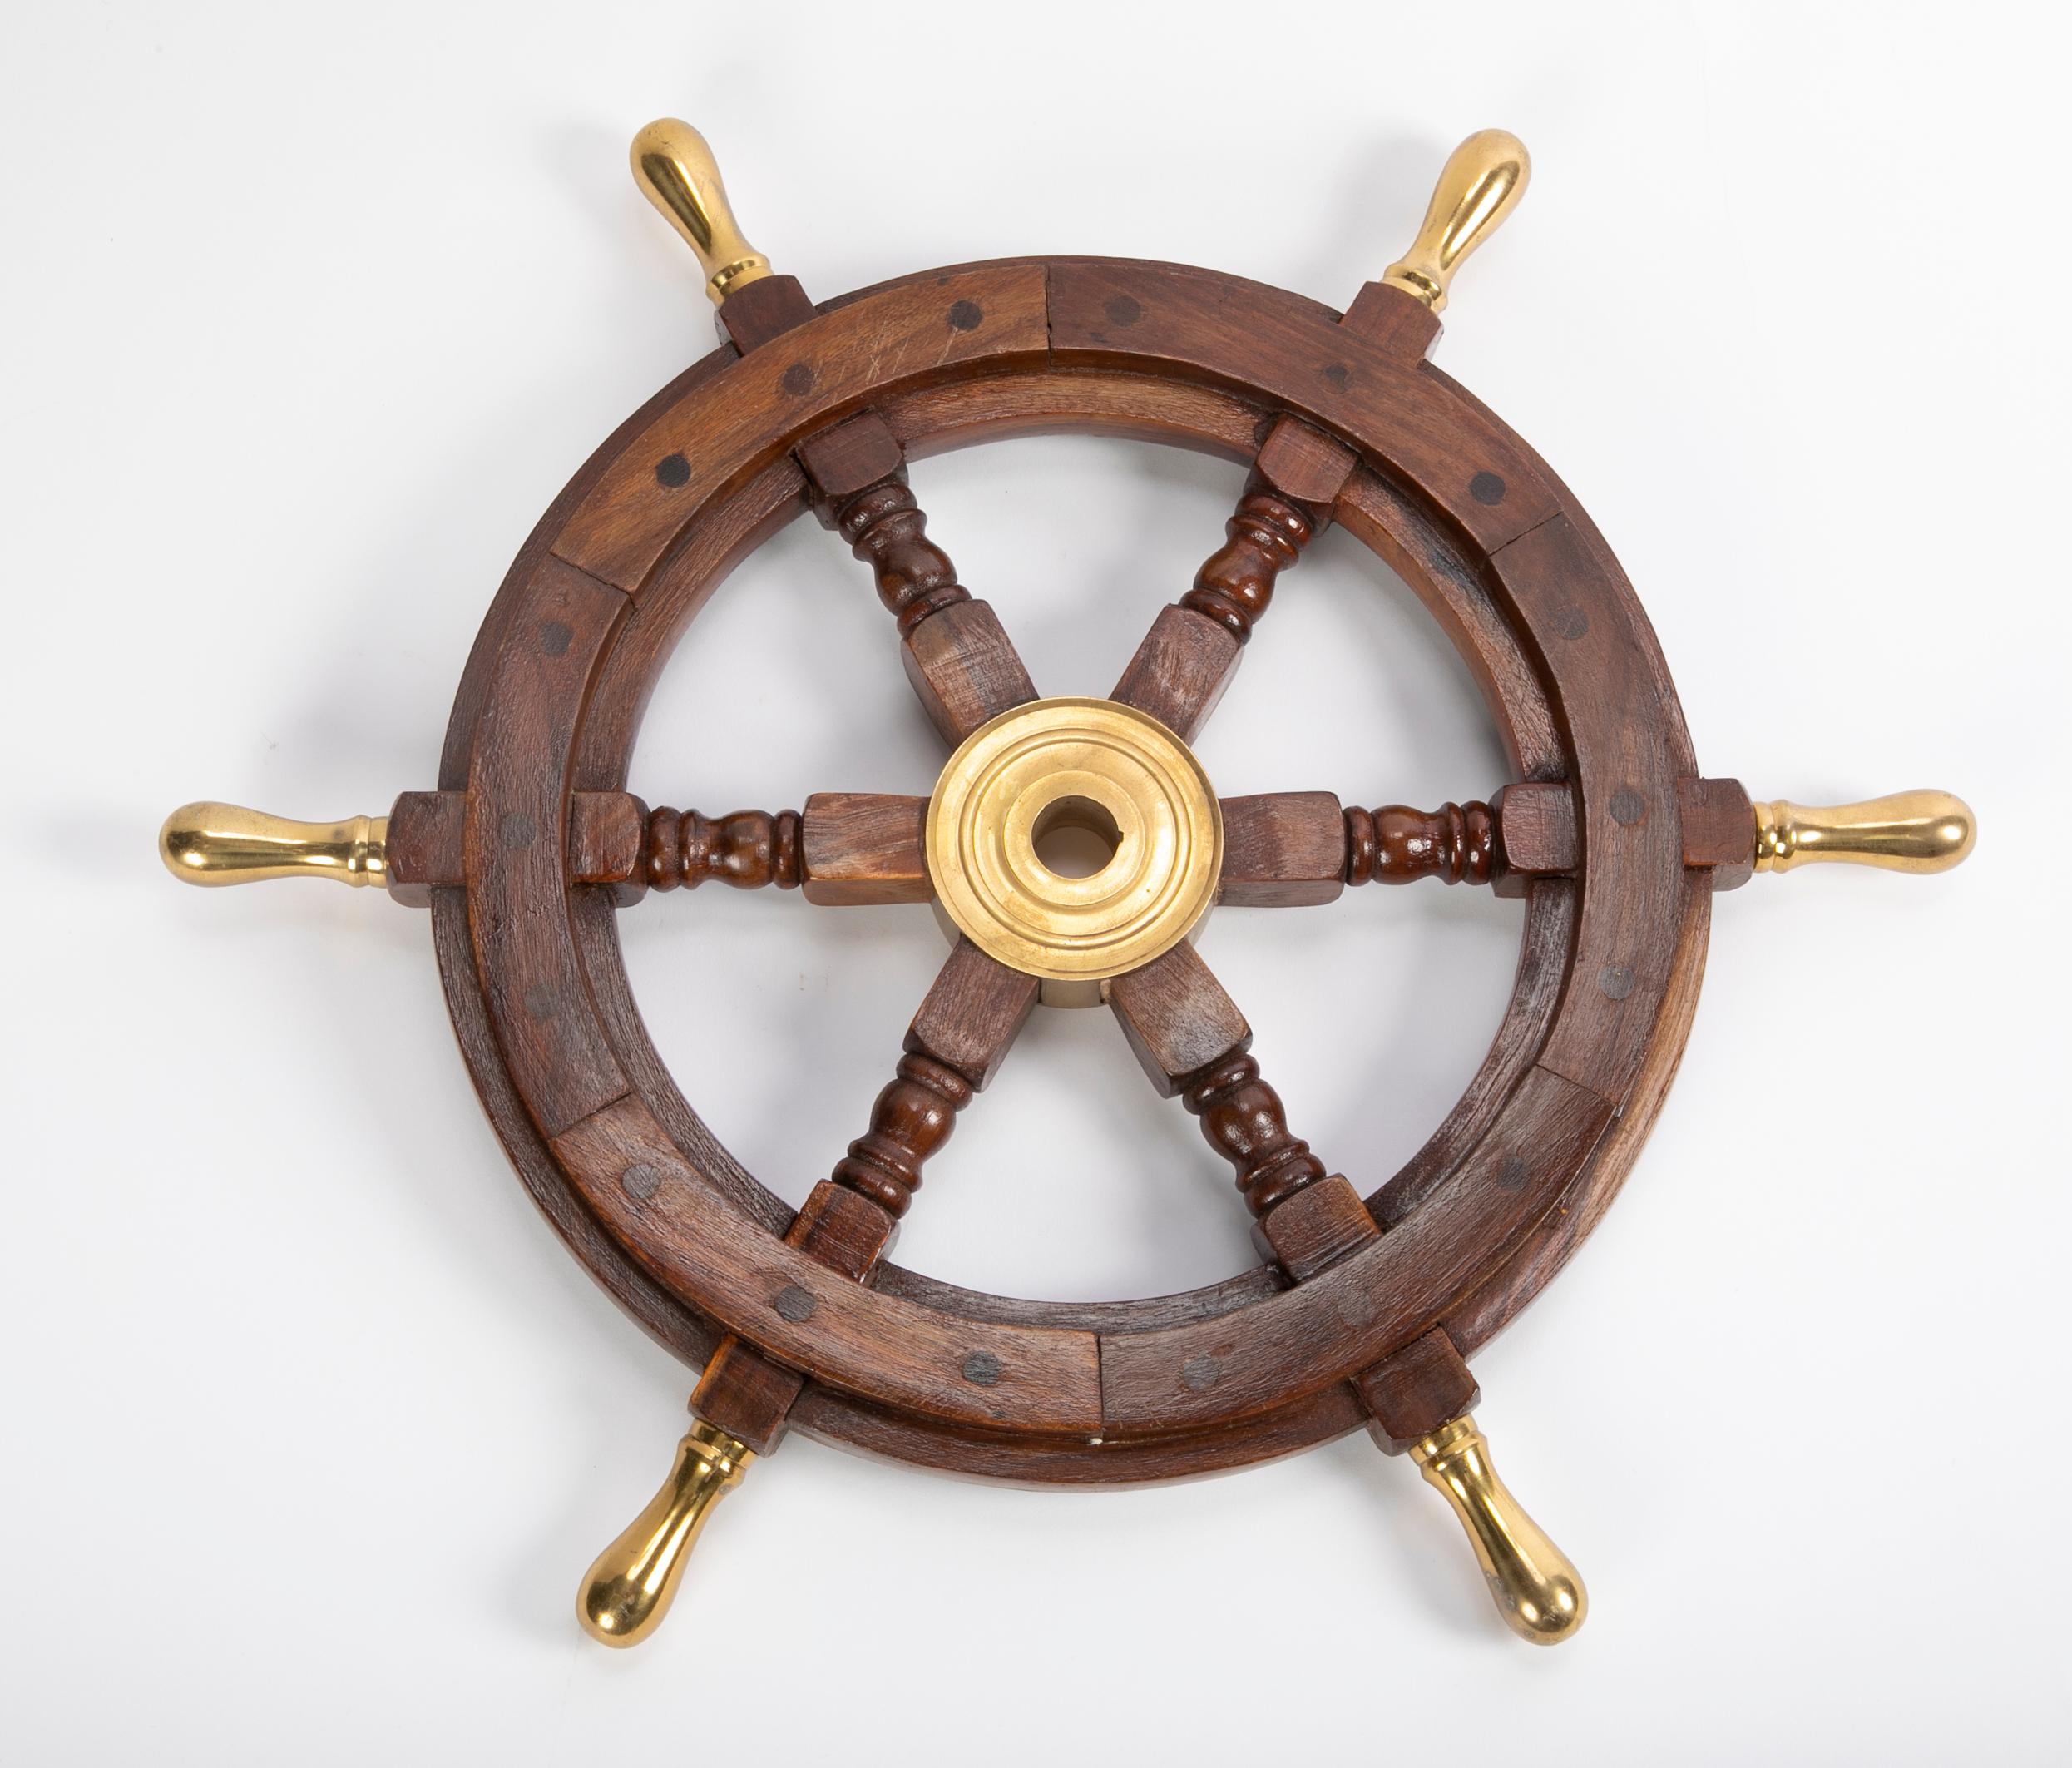 A large early 20th century wooden ship's wheel with brass accents.